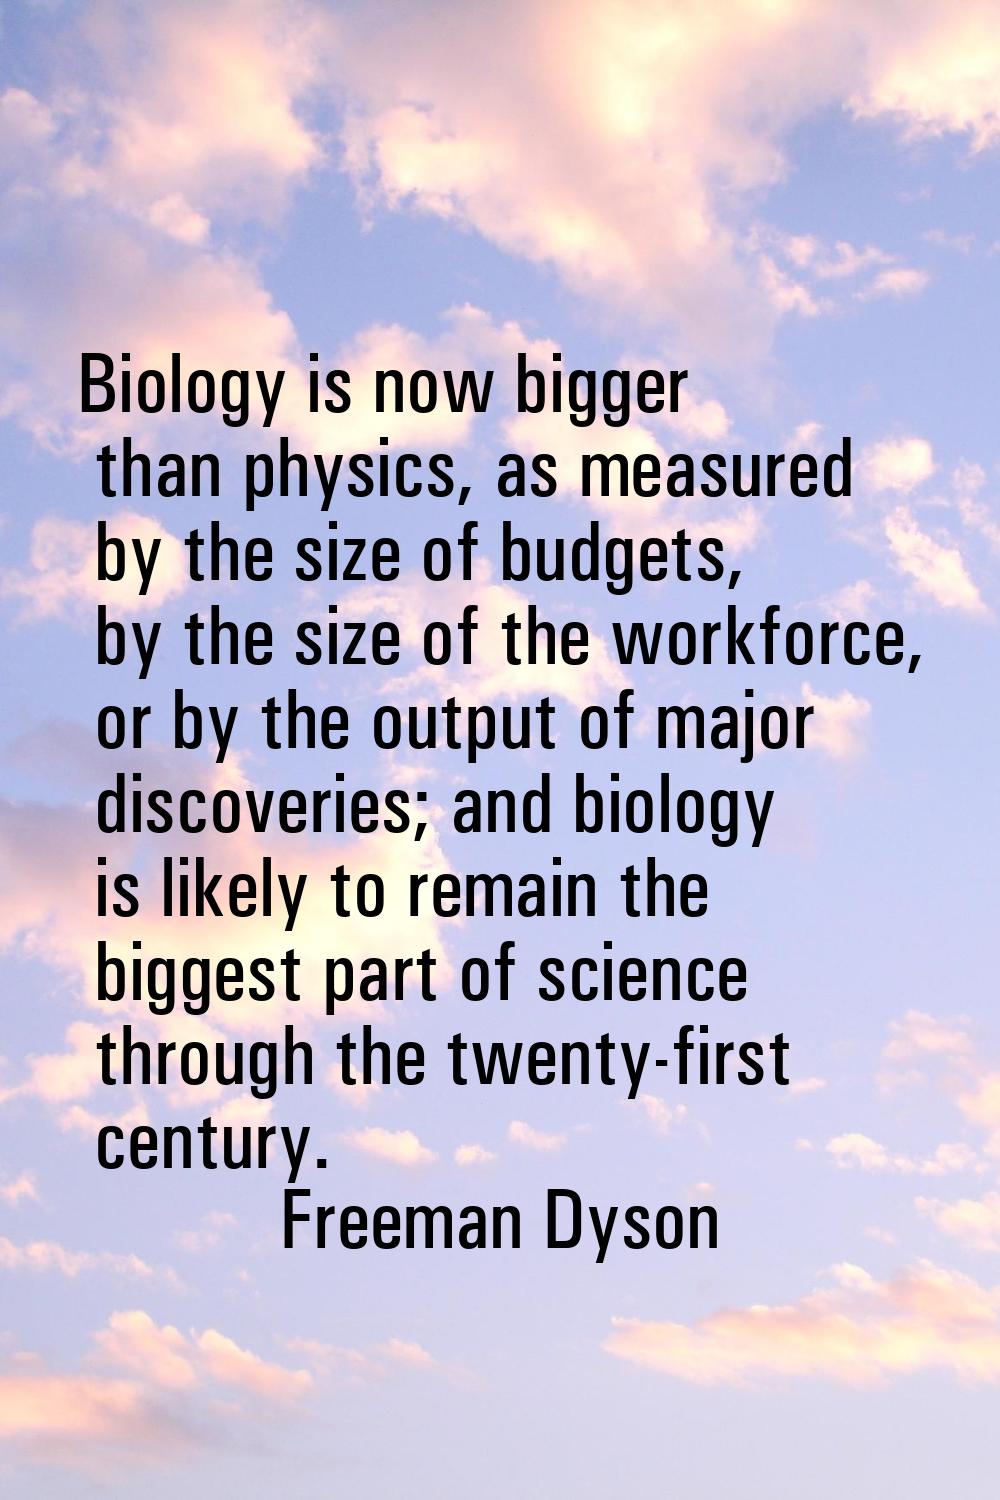 Biology is now bigger than physics, as measured by the size of budgets, by the size of the workforc